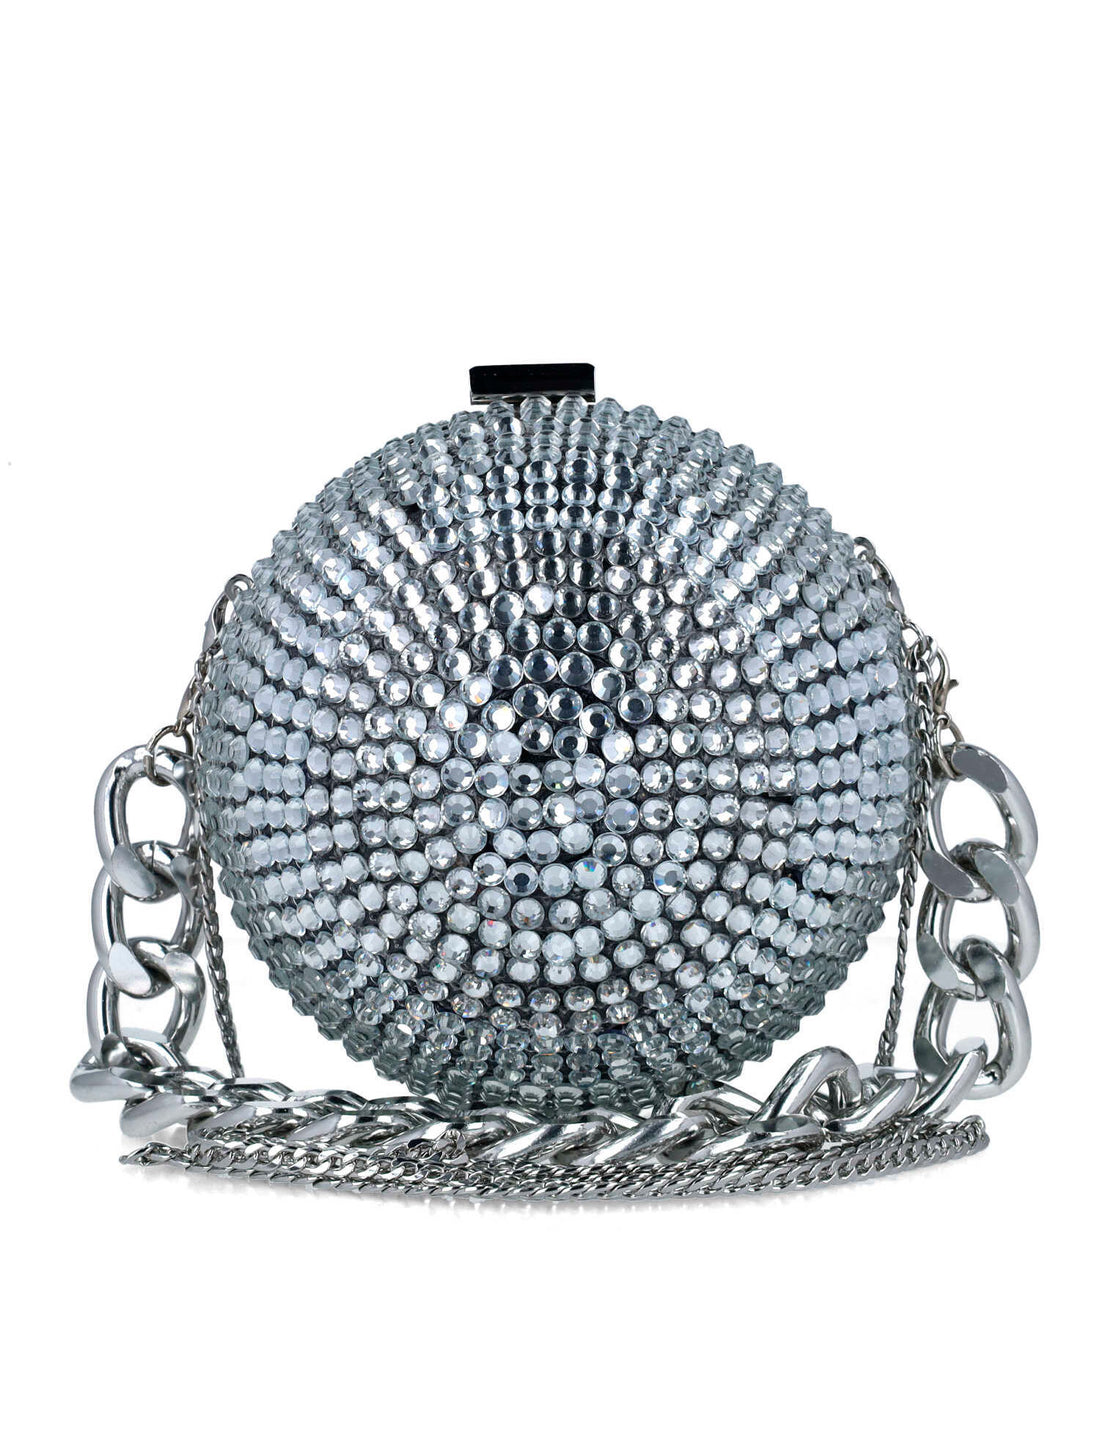 Round Clutch With Over Embellishment And Chain Strap_85670_01_01